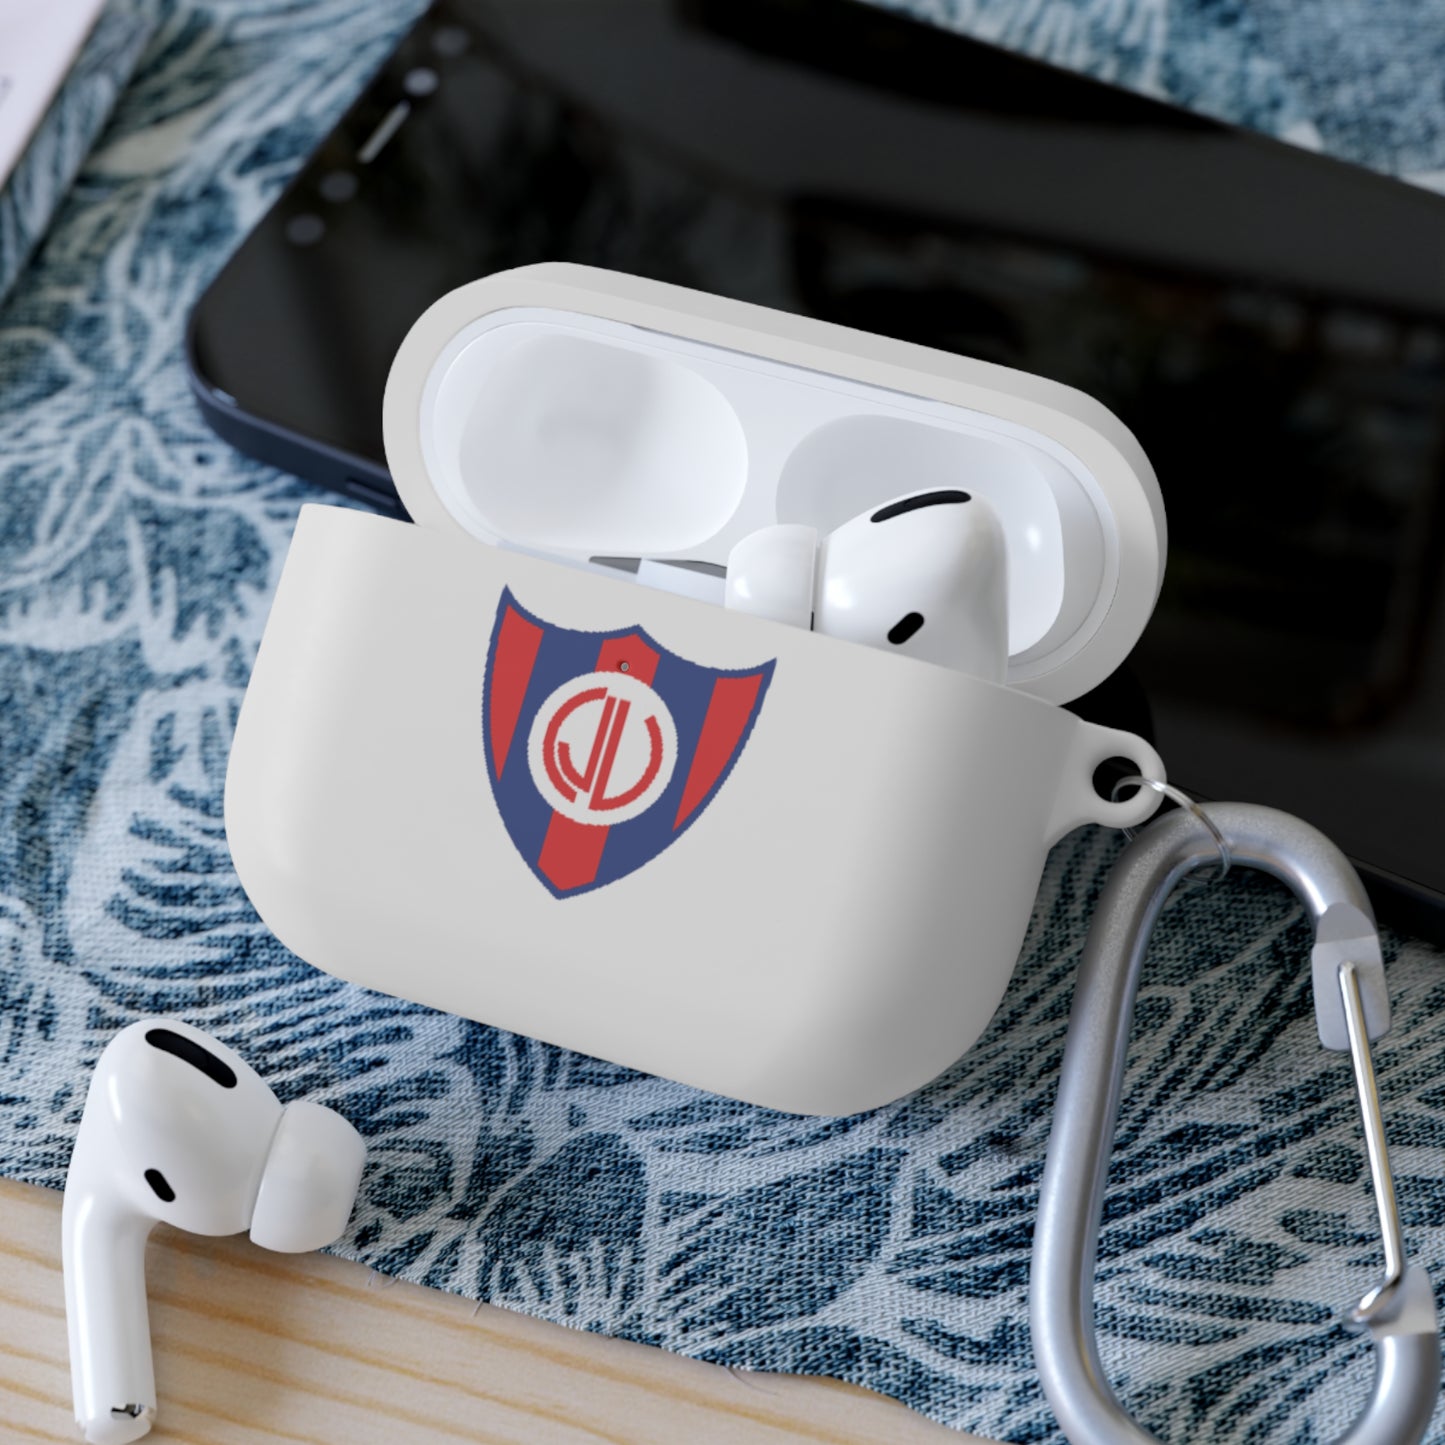 Club Juventud Unida de Lincoln AirPods and AirPods Pro Case Cover